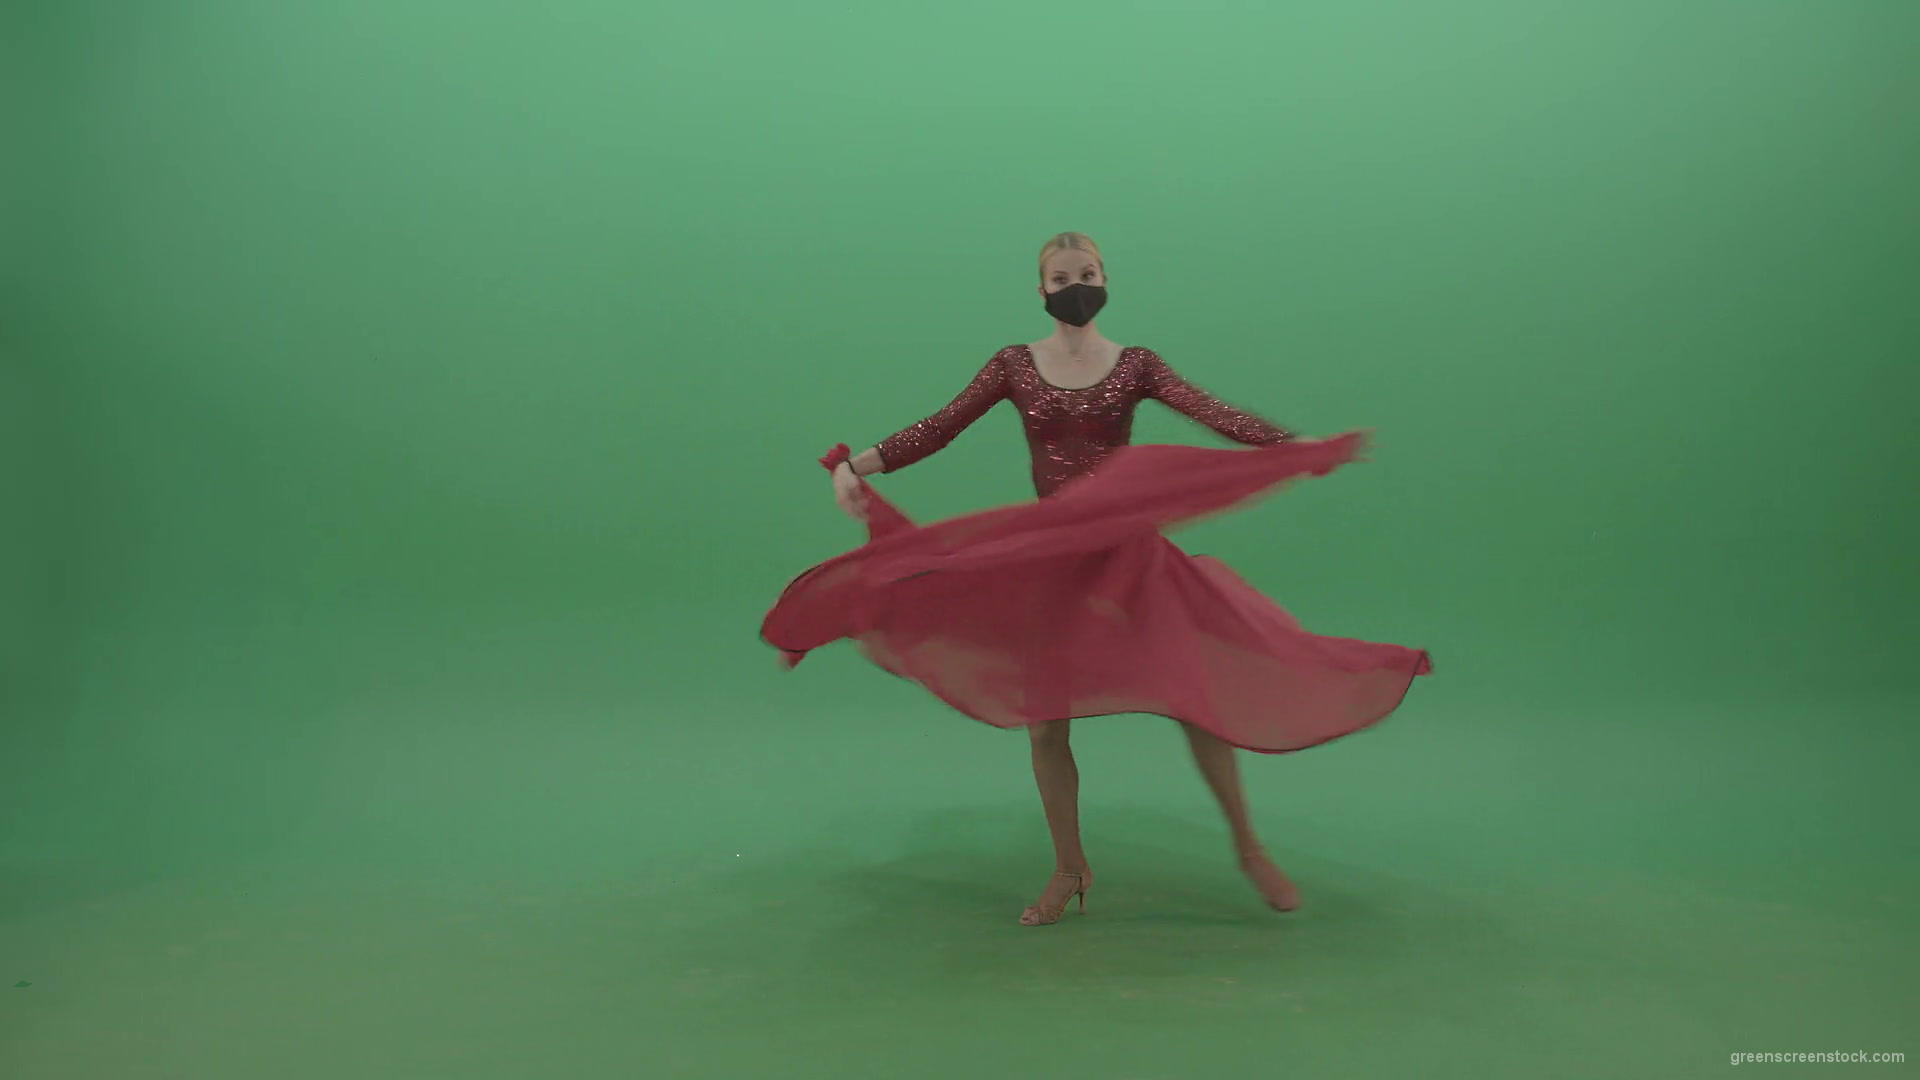 Blonde-Girl-in-red-Flamenco-Dress-makes-spinning-bowing-isolated-on-green-screen-4K-Video-Footage-1920_005 Green Screen Stock